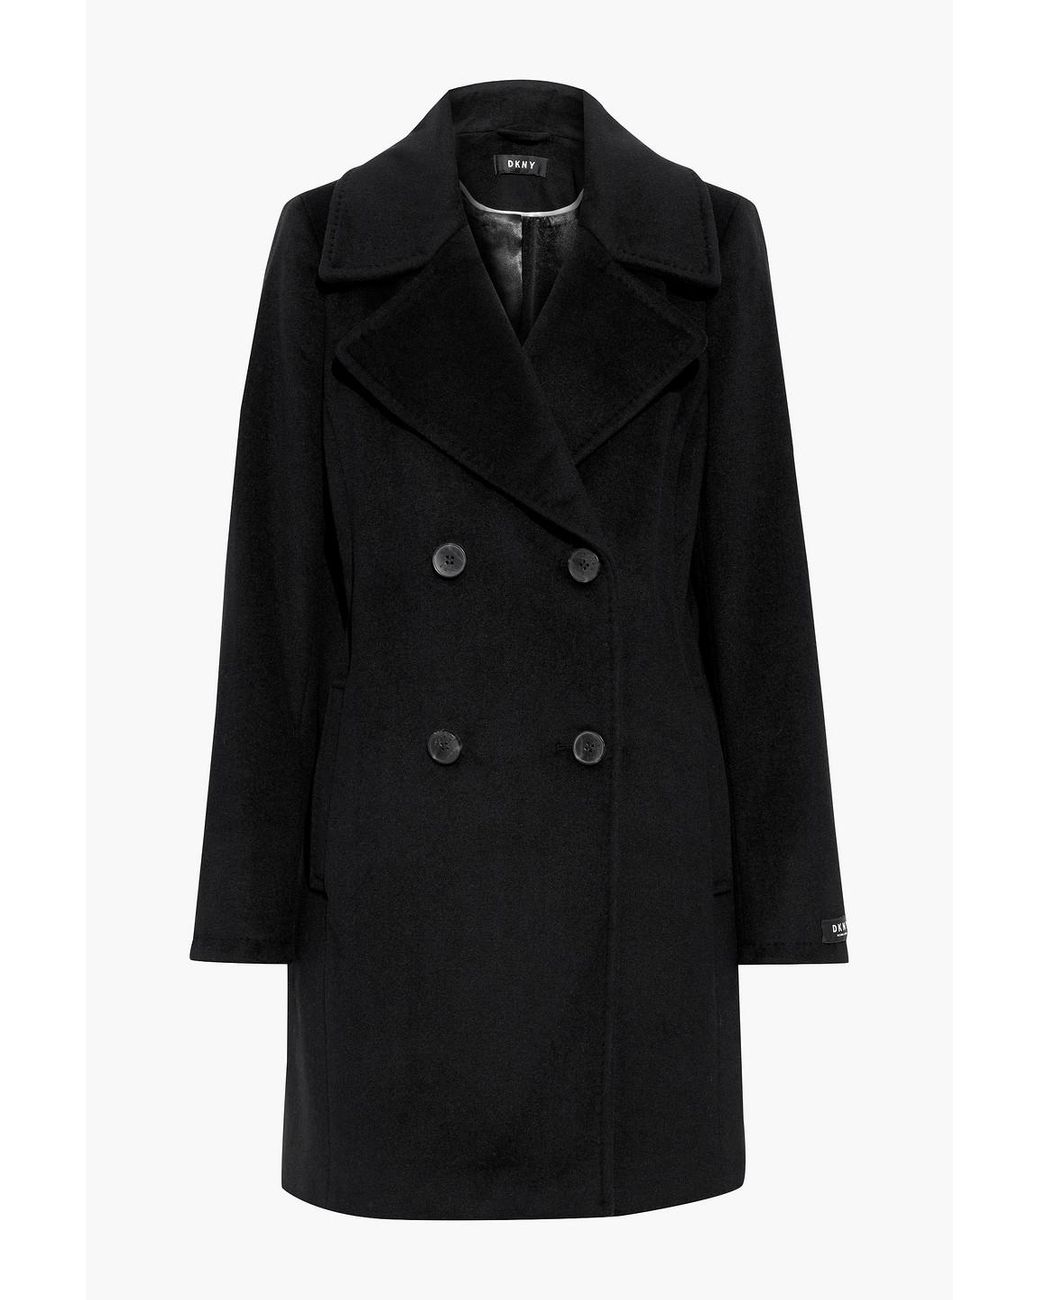 DKNY Synthetic Double-breasted Belted Wool-blend Felt Coat in Black | Lyst